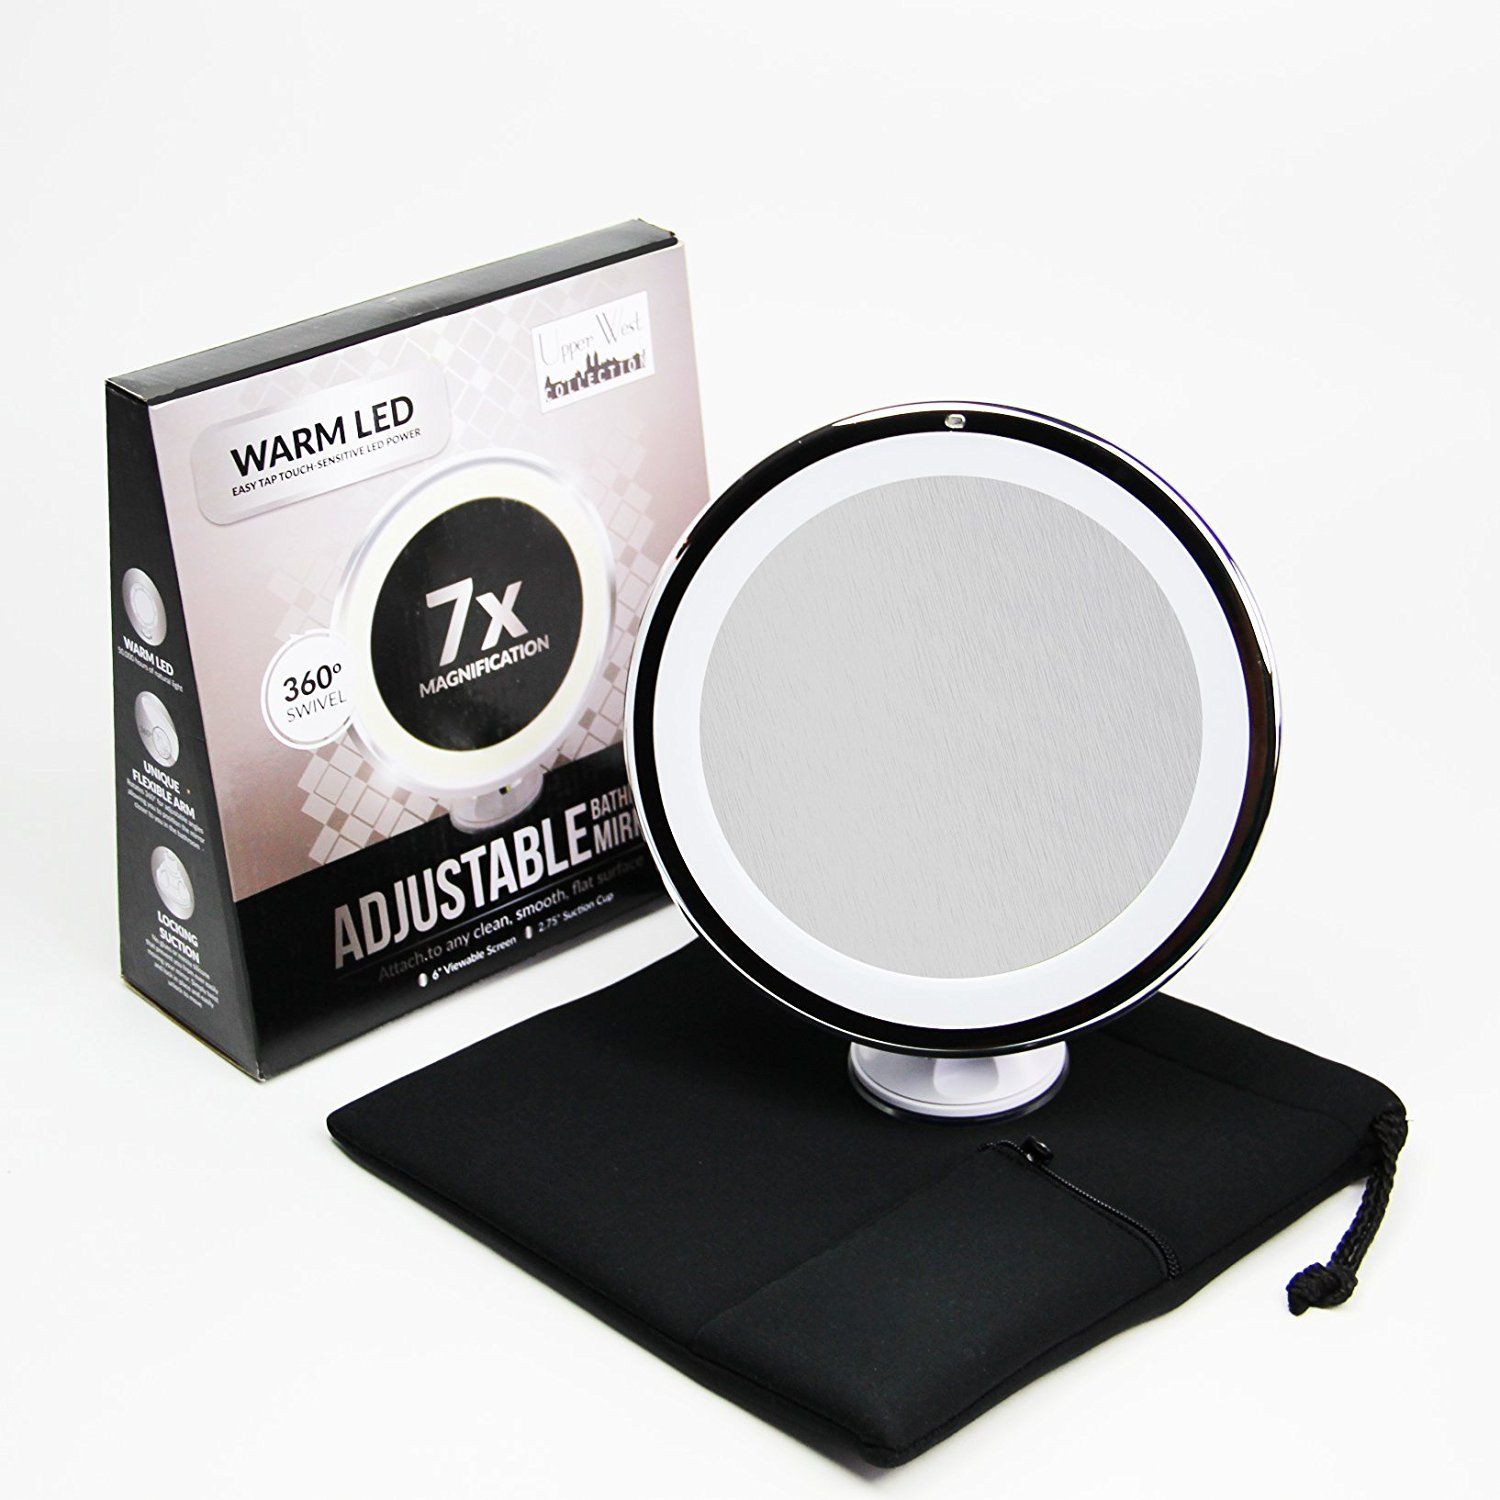 7x Magnifying Lighted Makeup Mirror (View 9 of 15)